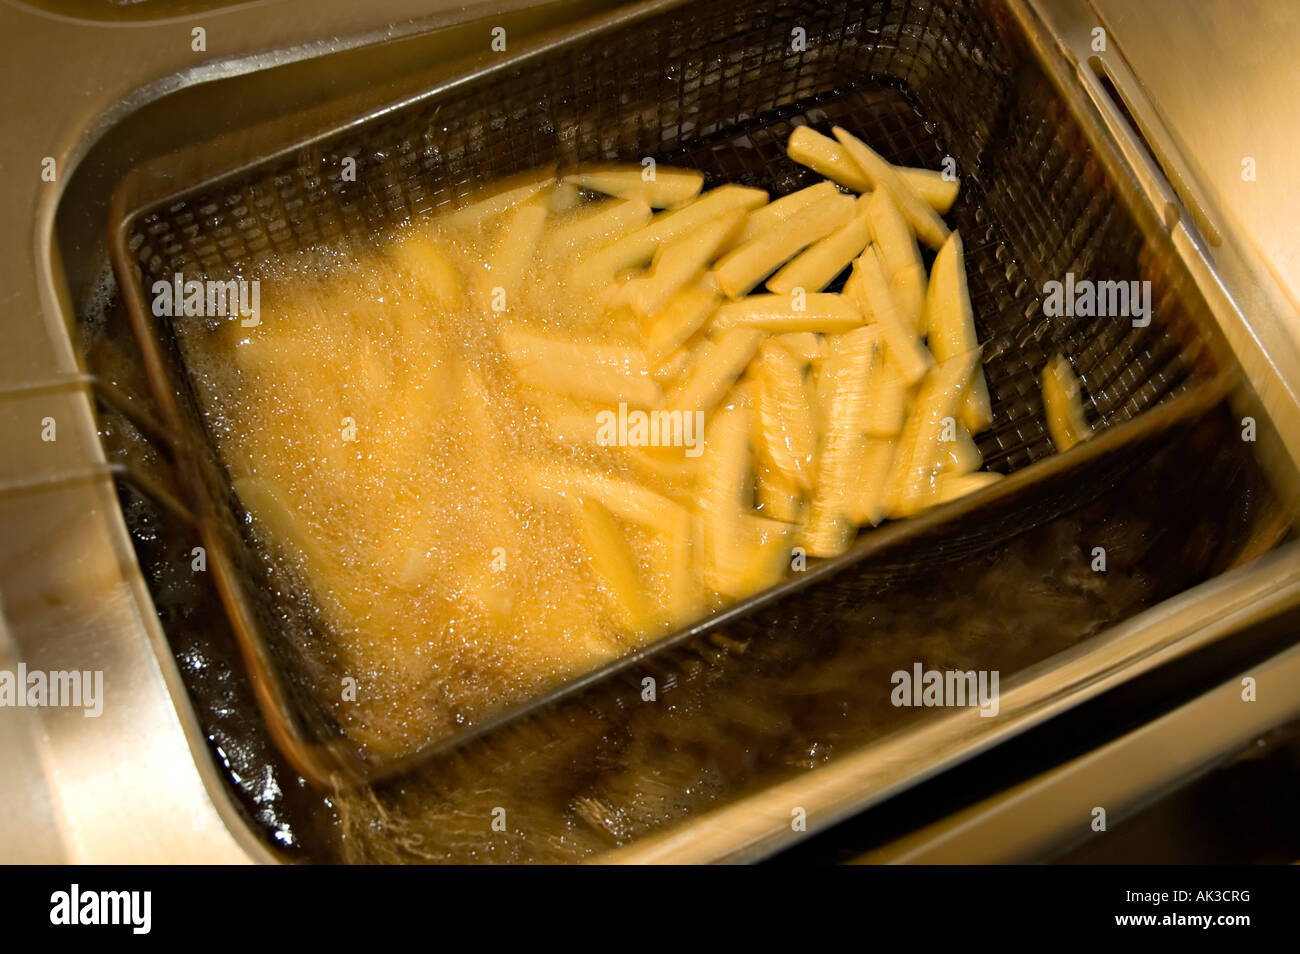 deep fried chips being deep fried for eating Stock Photo